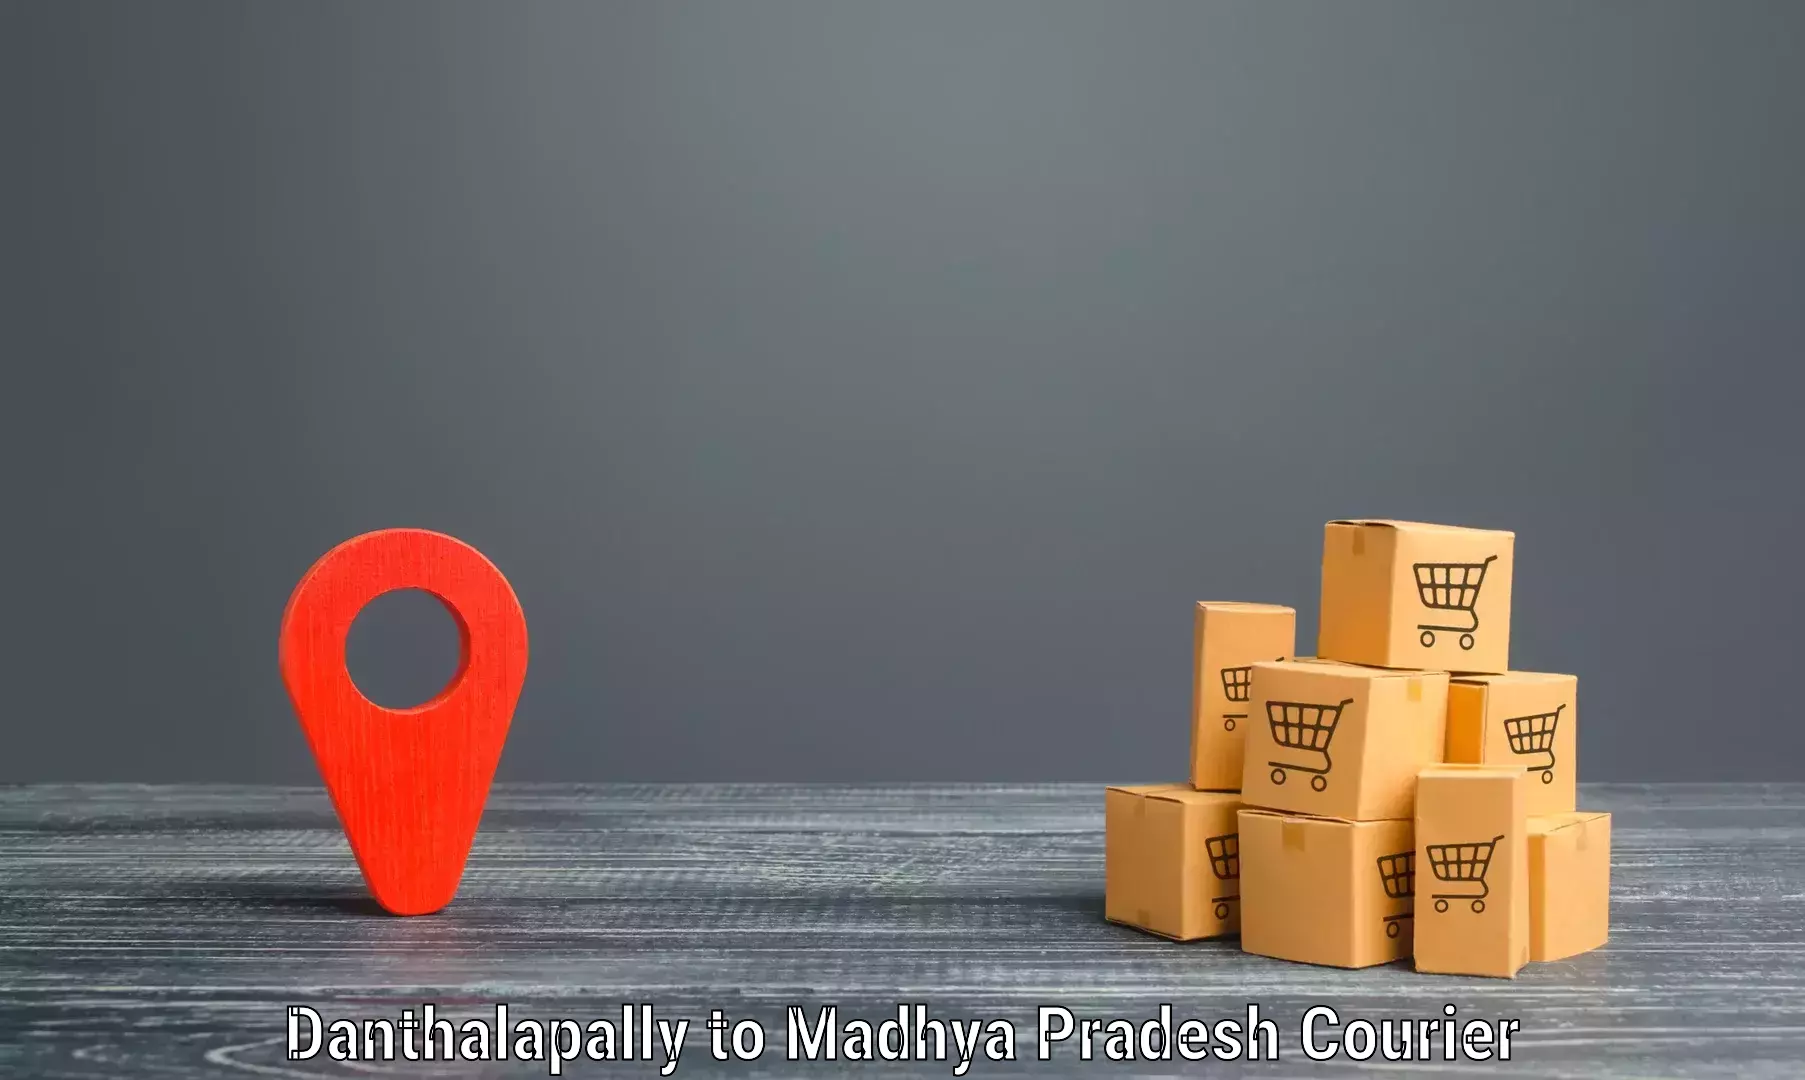 Modern courier technology Danthalapally to Depalpur